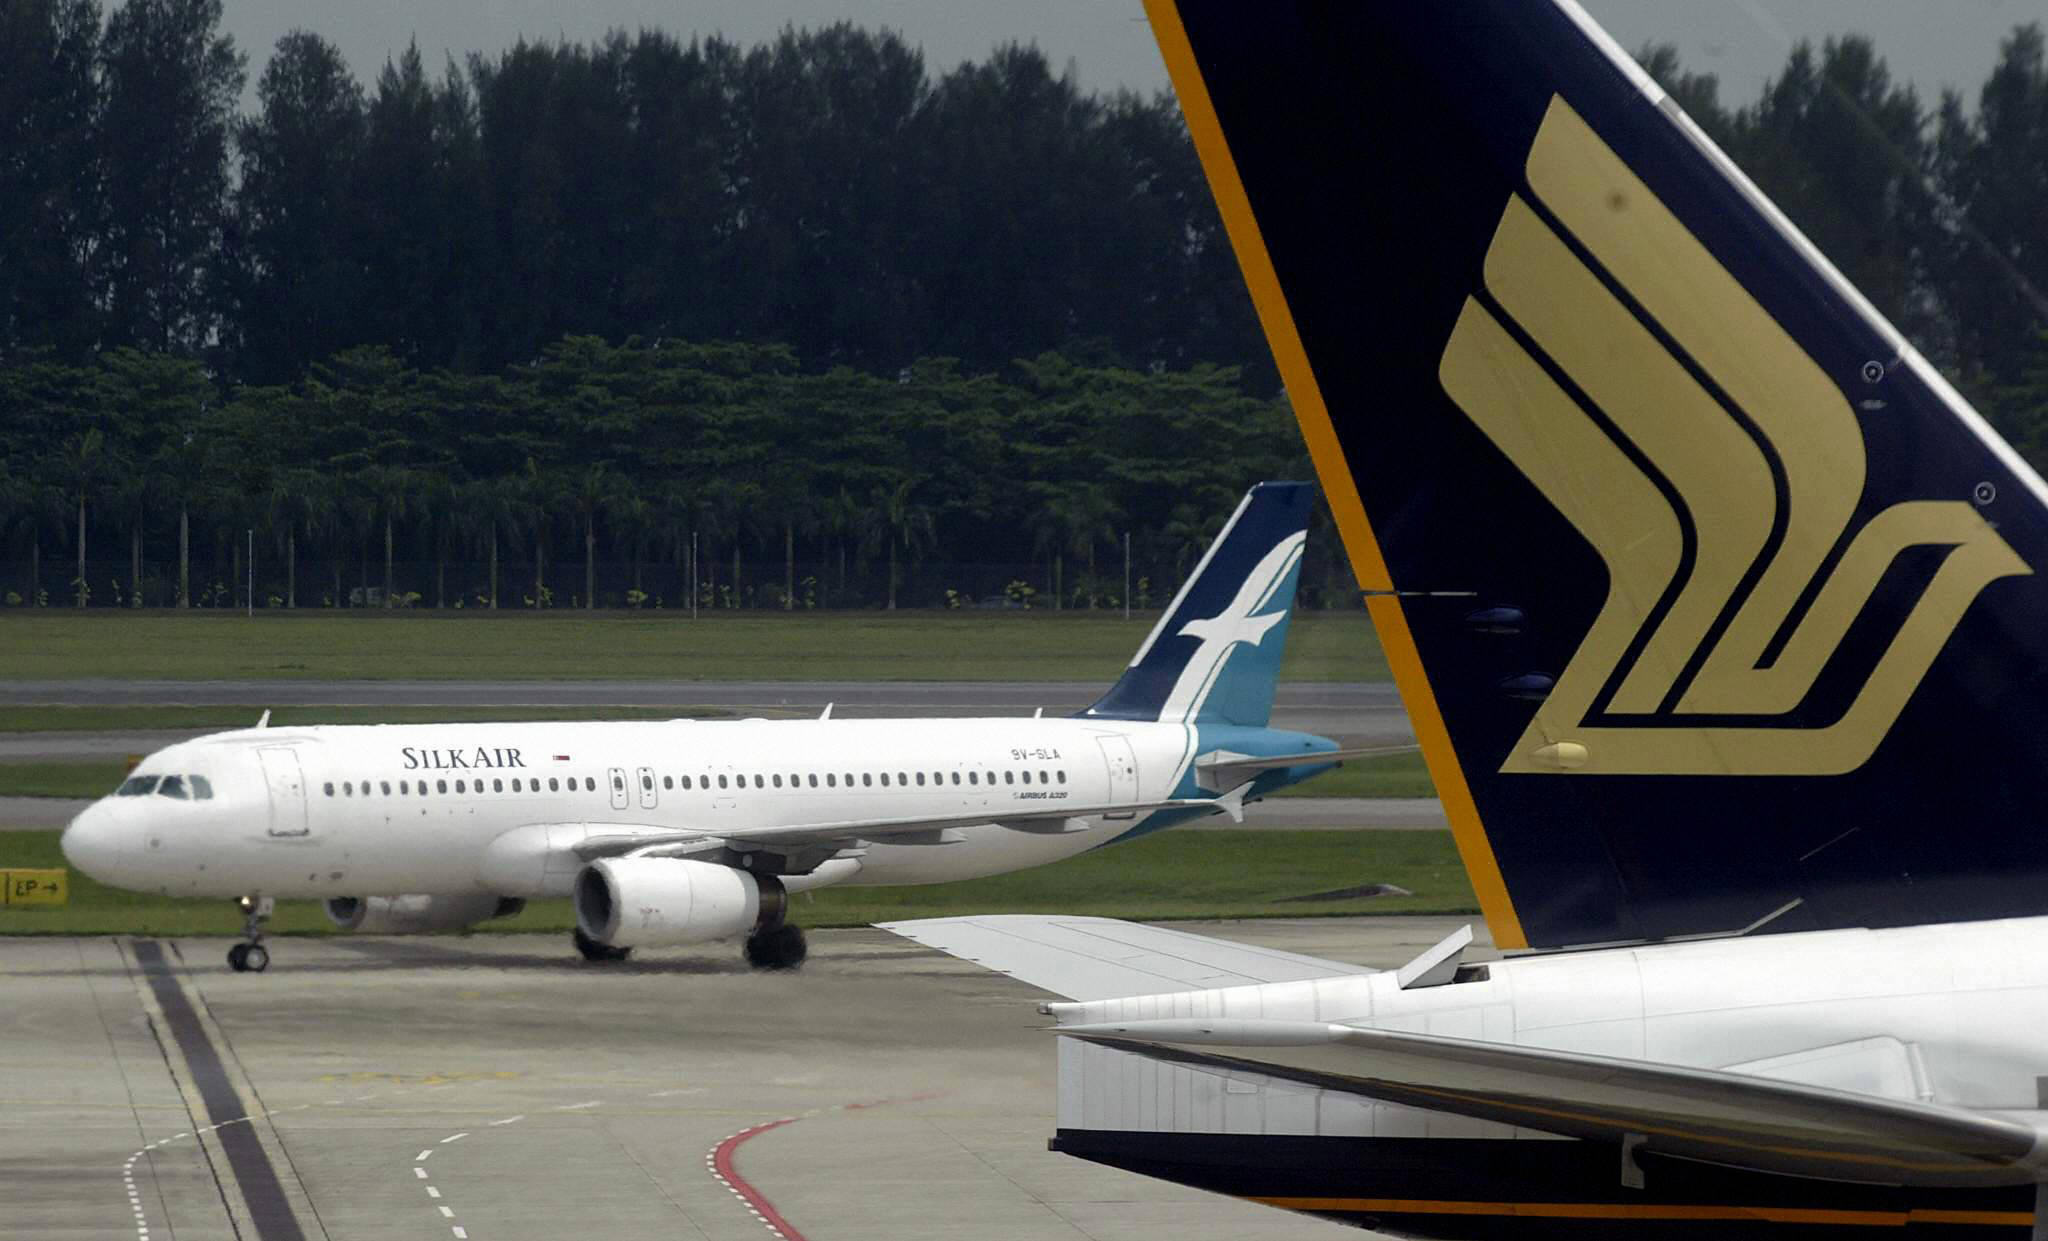 A Singapore Airlines (SIA) plane and its subsidiary SilkAir plane -- not one of its six MAX 8 planes -- taxiing at Changi International Airport, Singapore. 